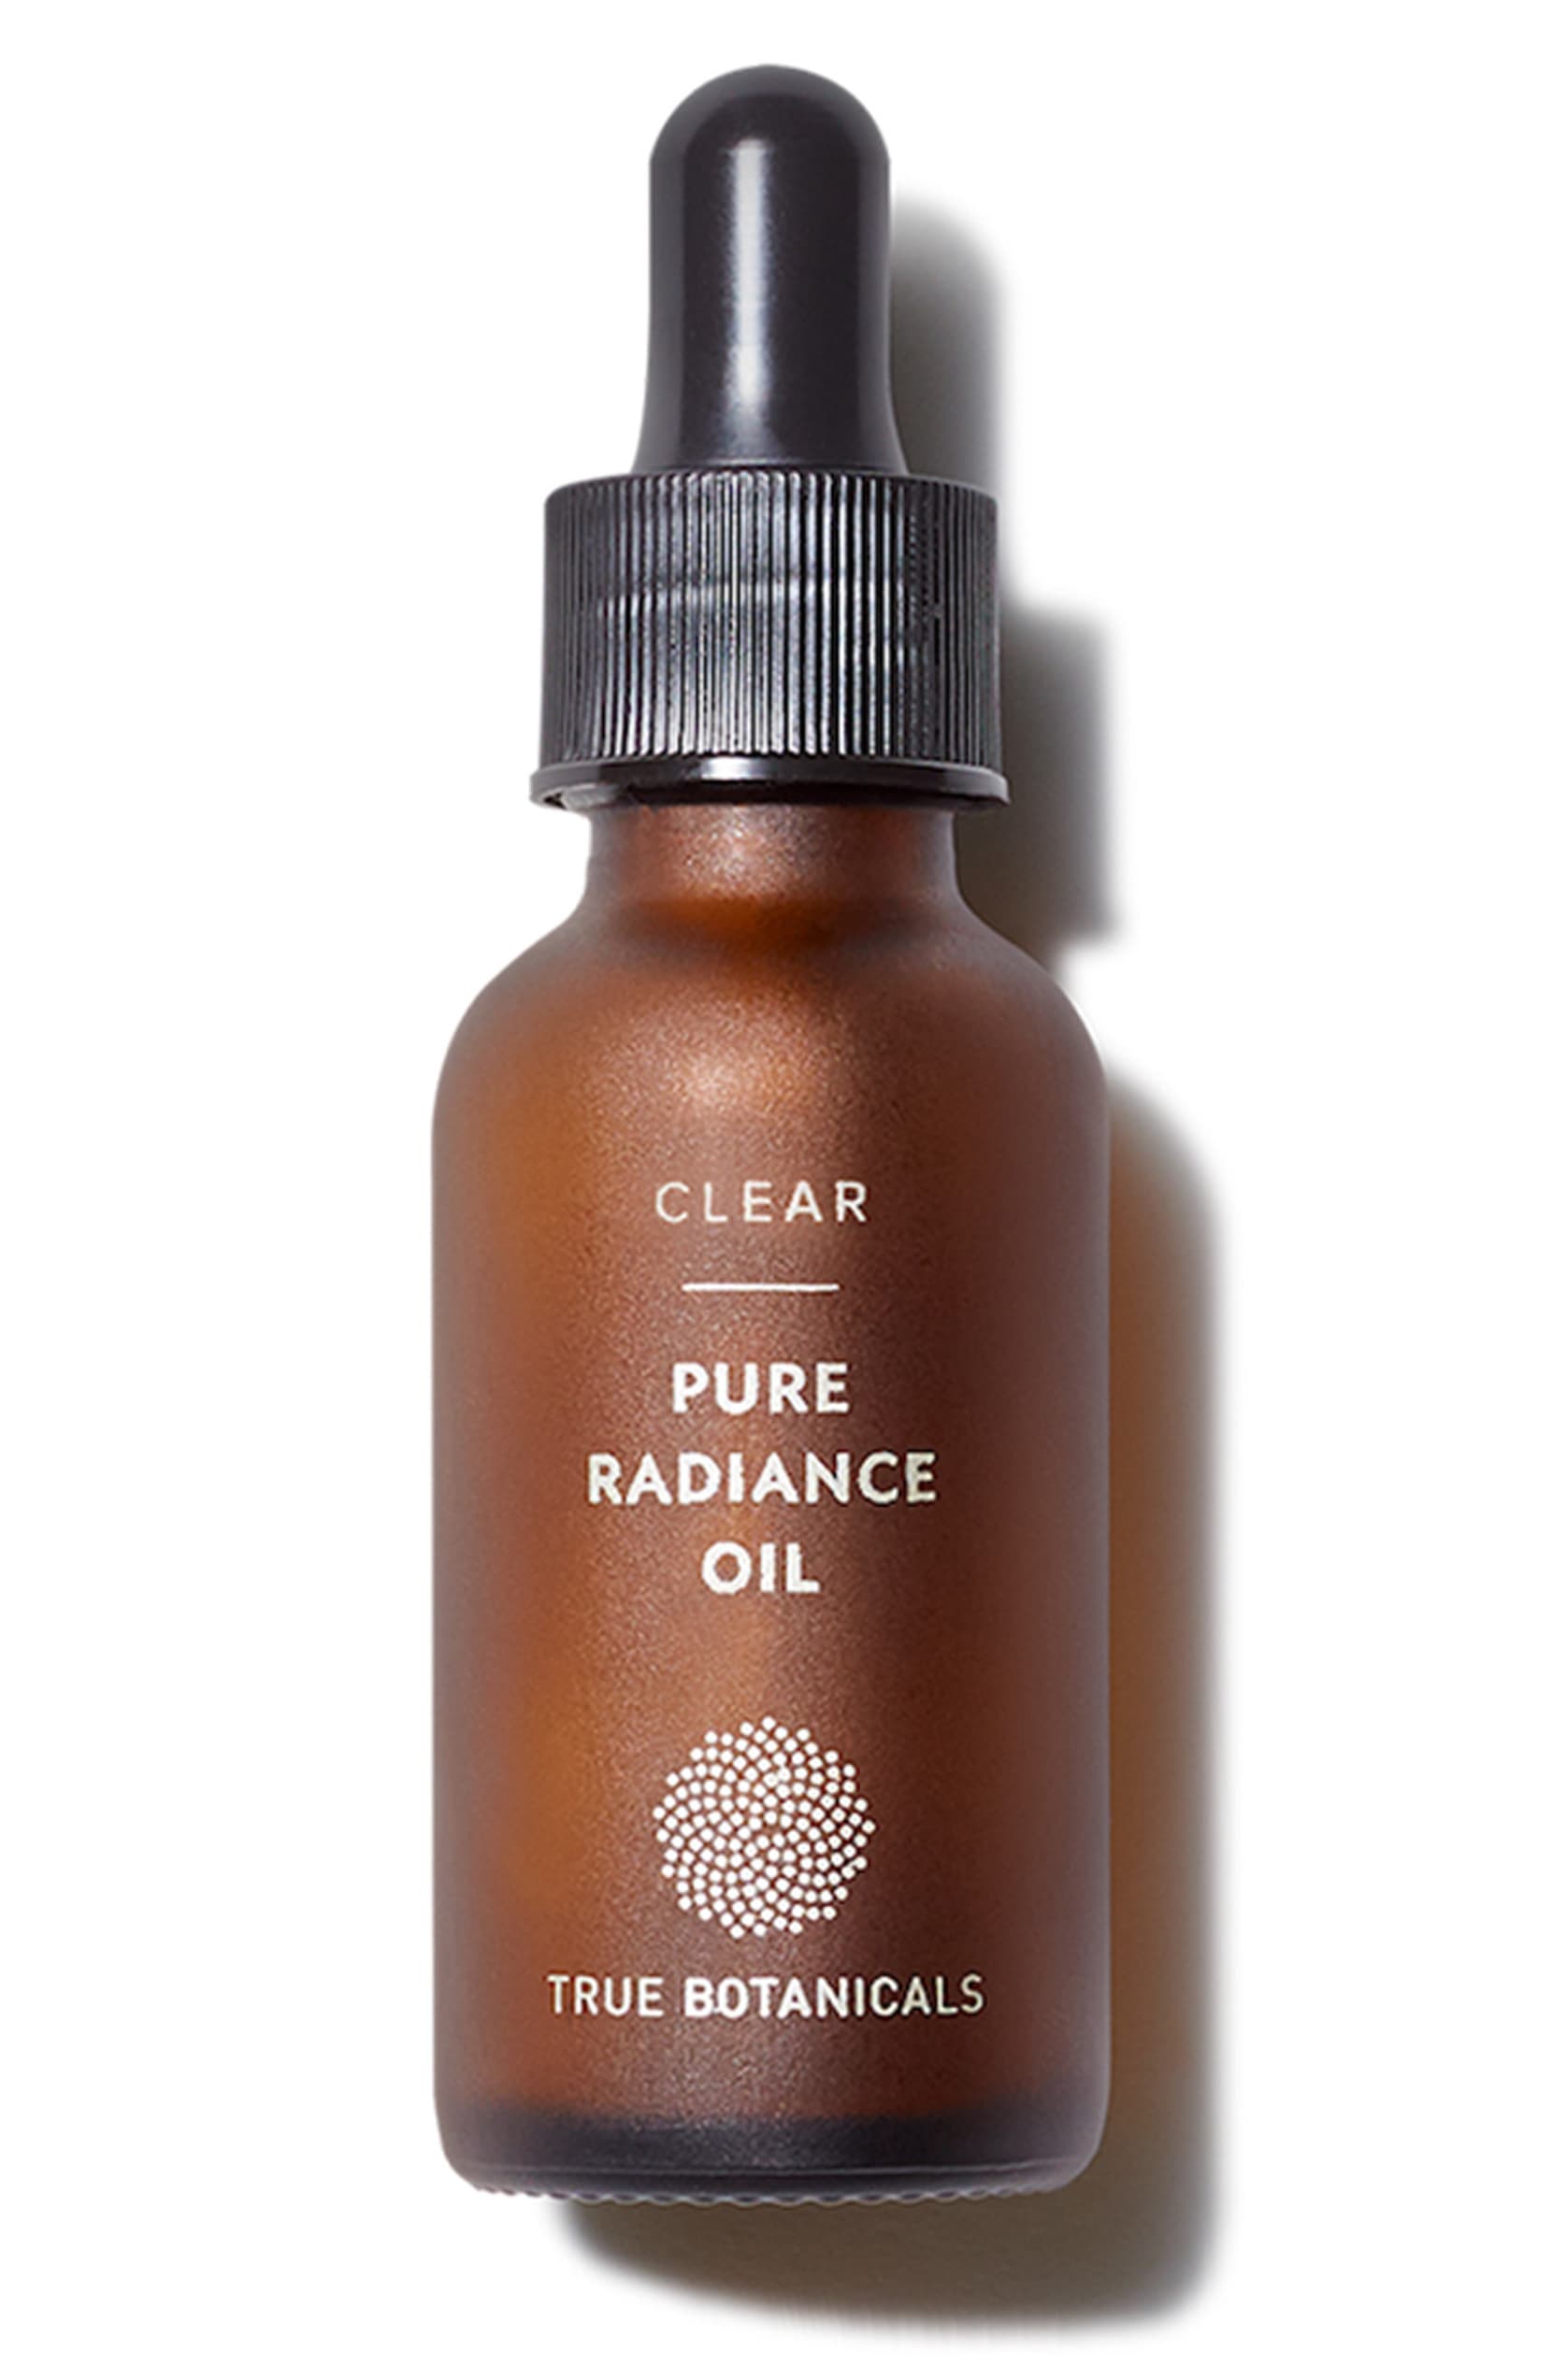 Best Pure Radiance Face Oil for Oily Skin - True Botanicals